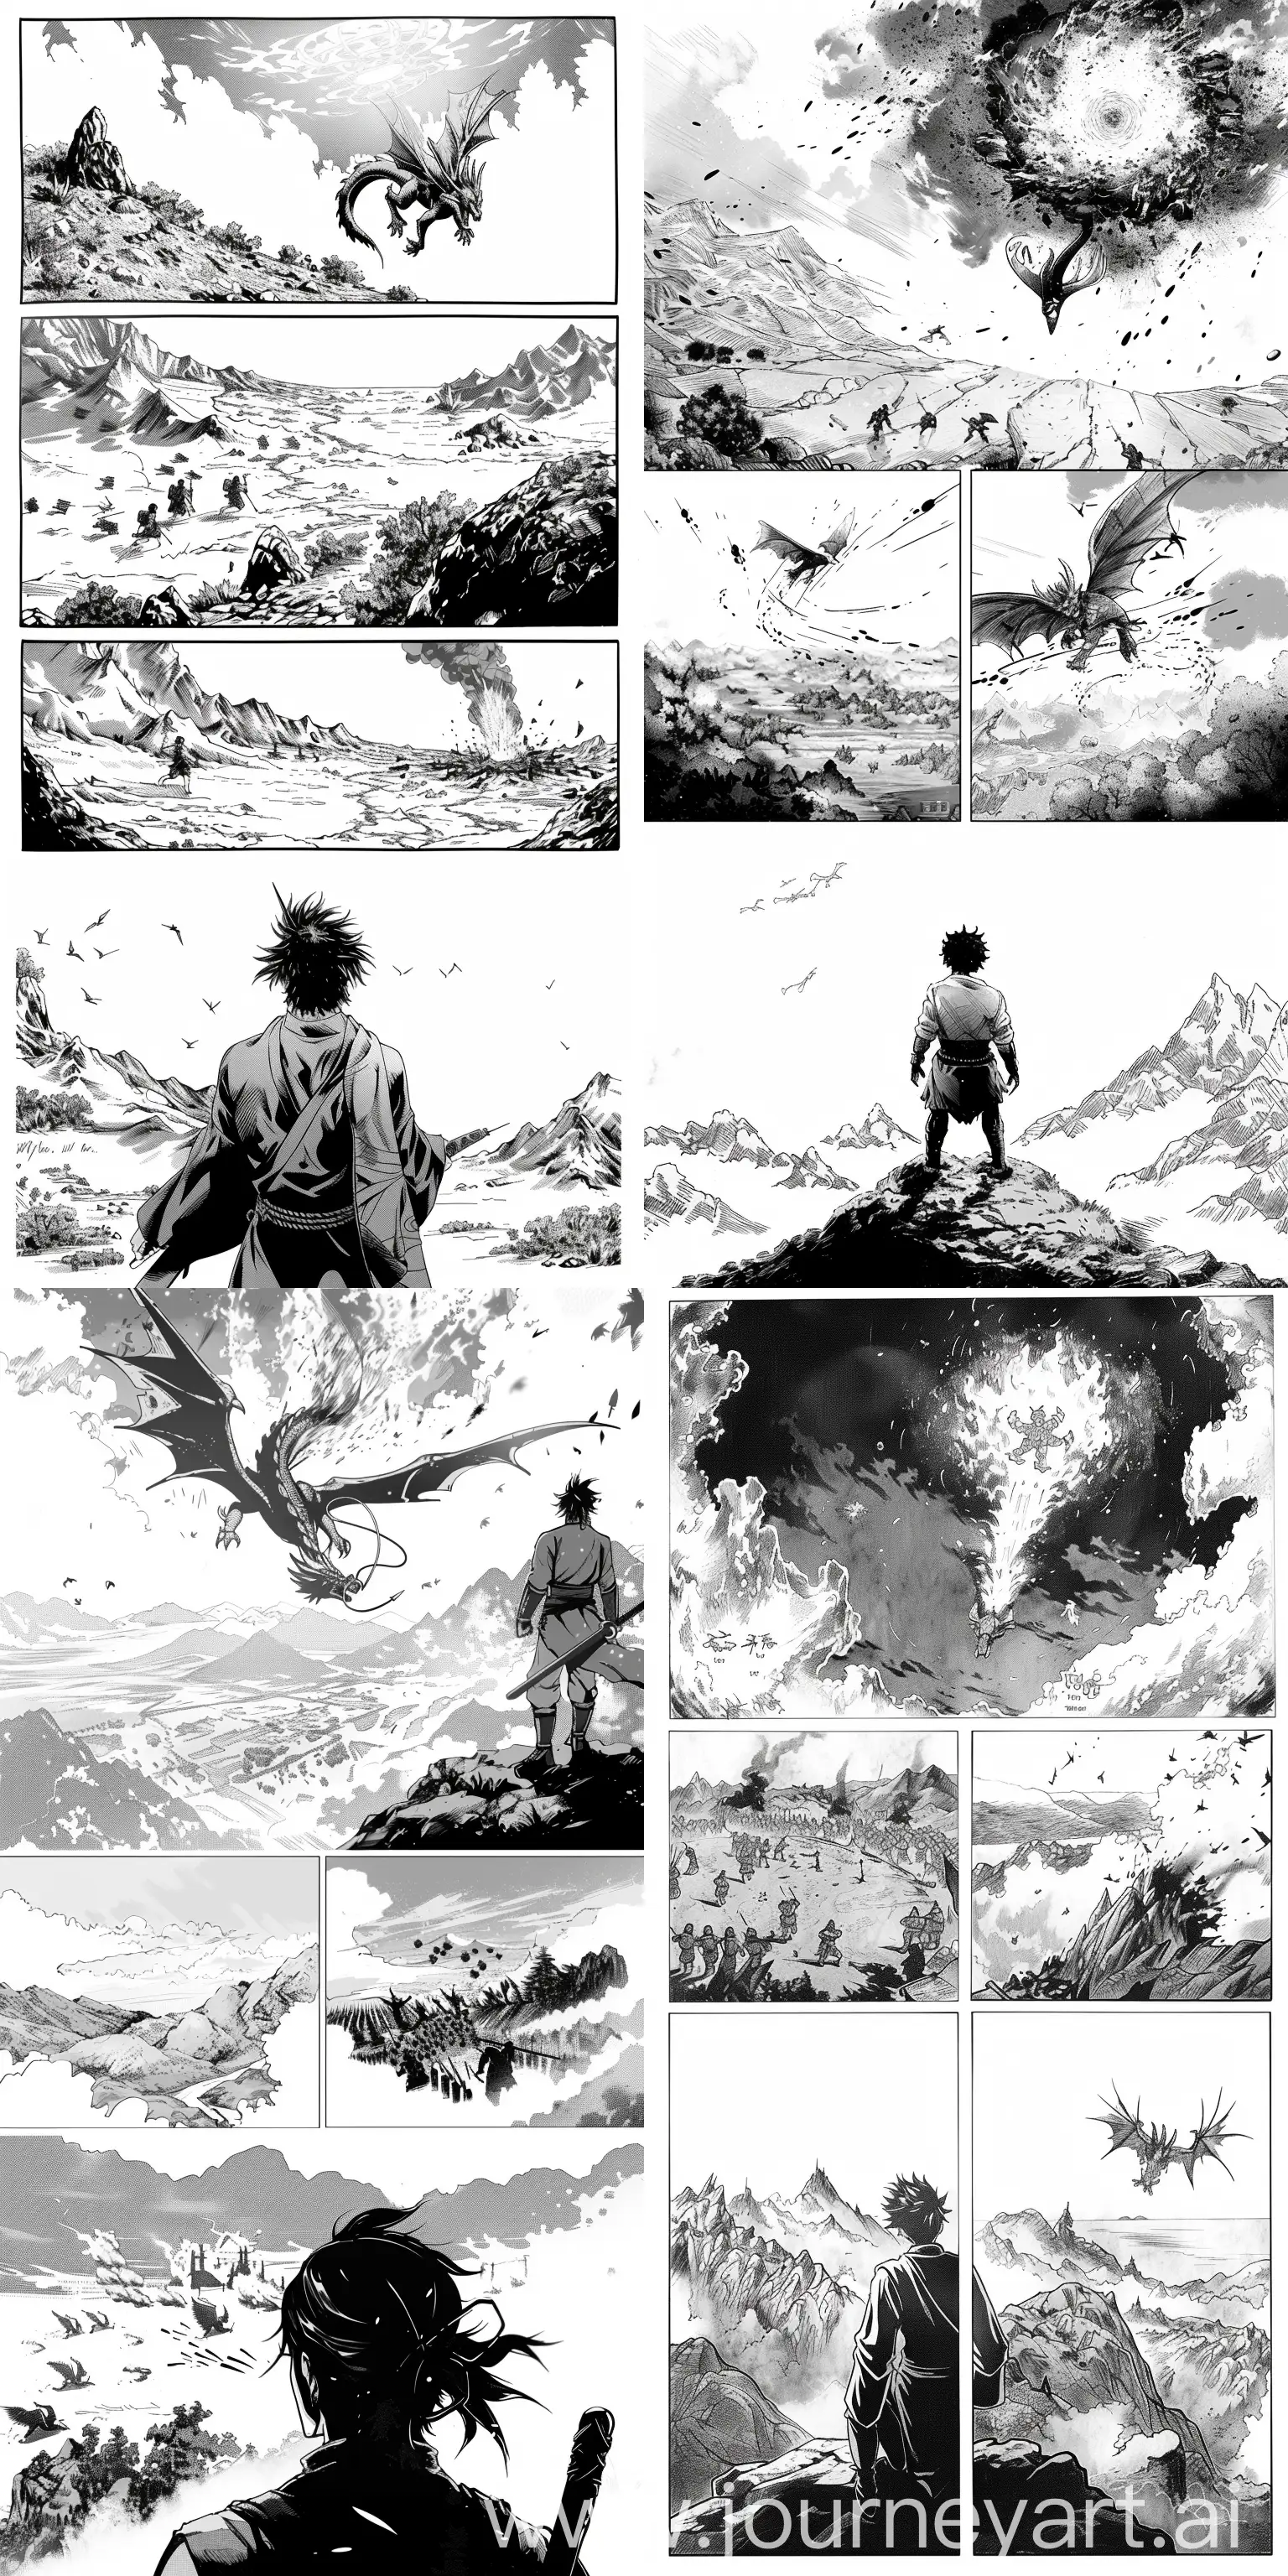 Warrior-Overlooking-the-End-of-an-Ancient-Battle-Black-and-White-Manga-Art